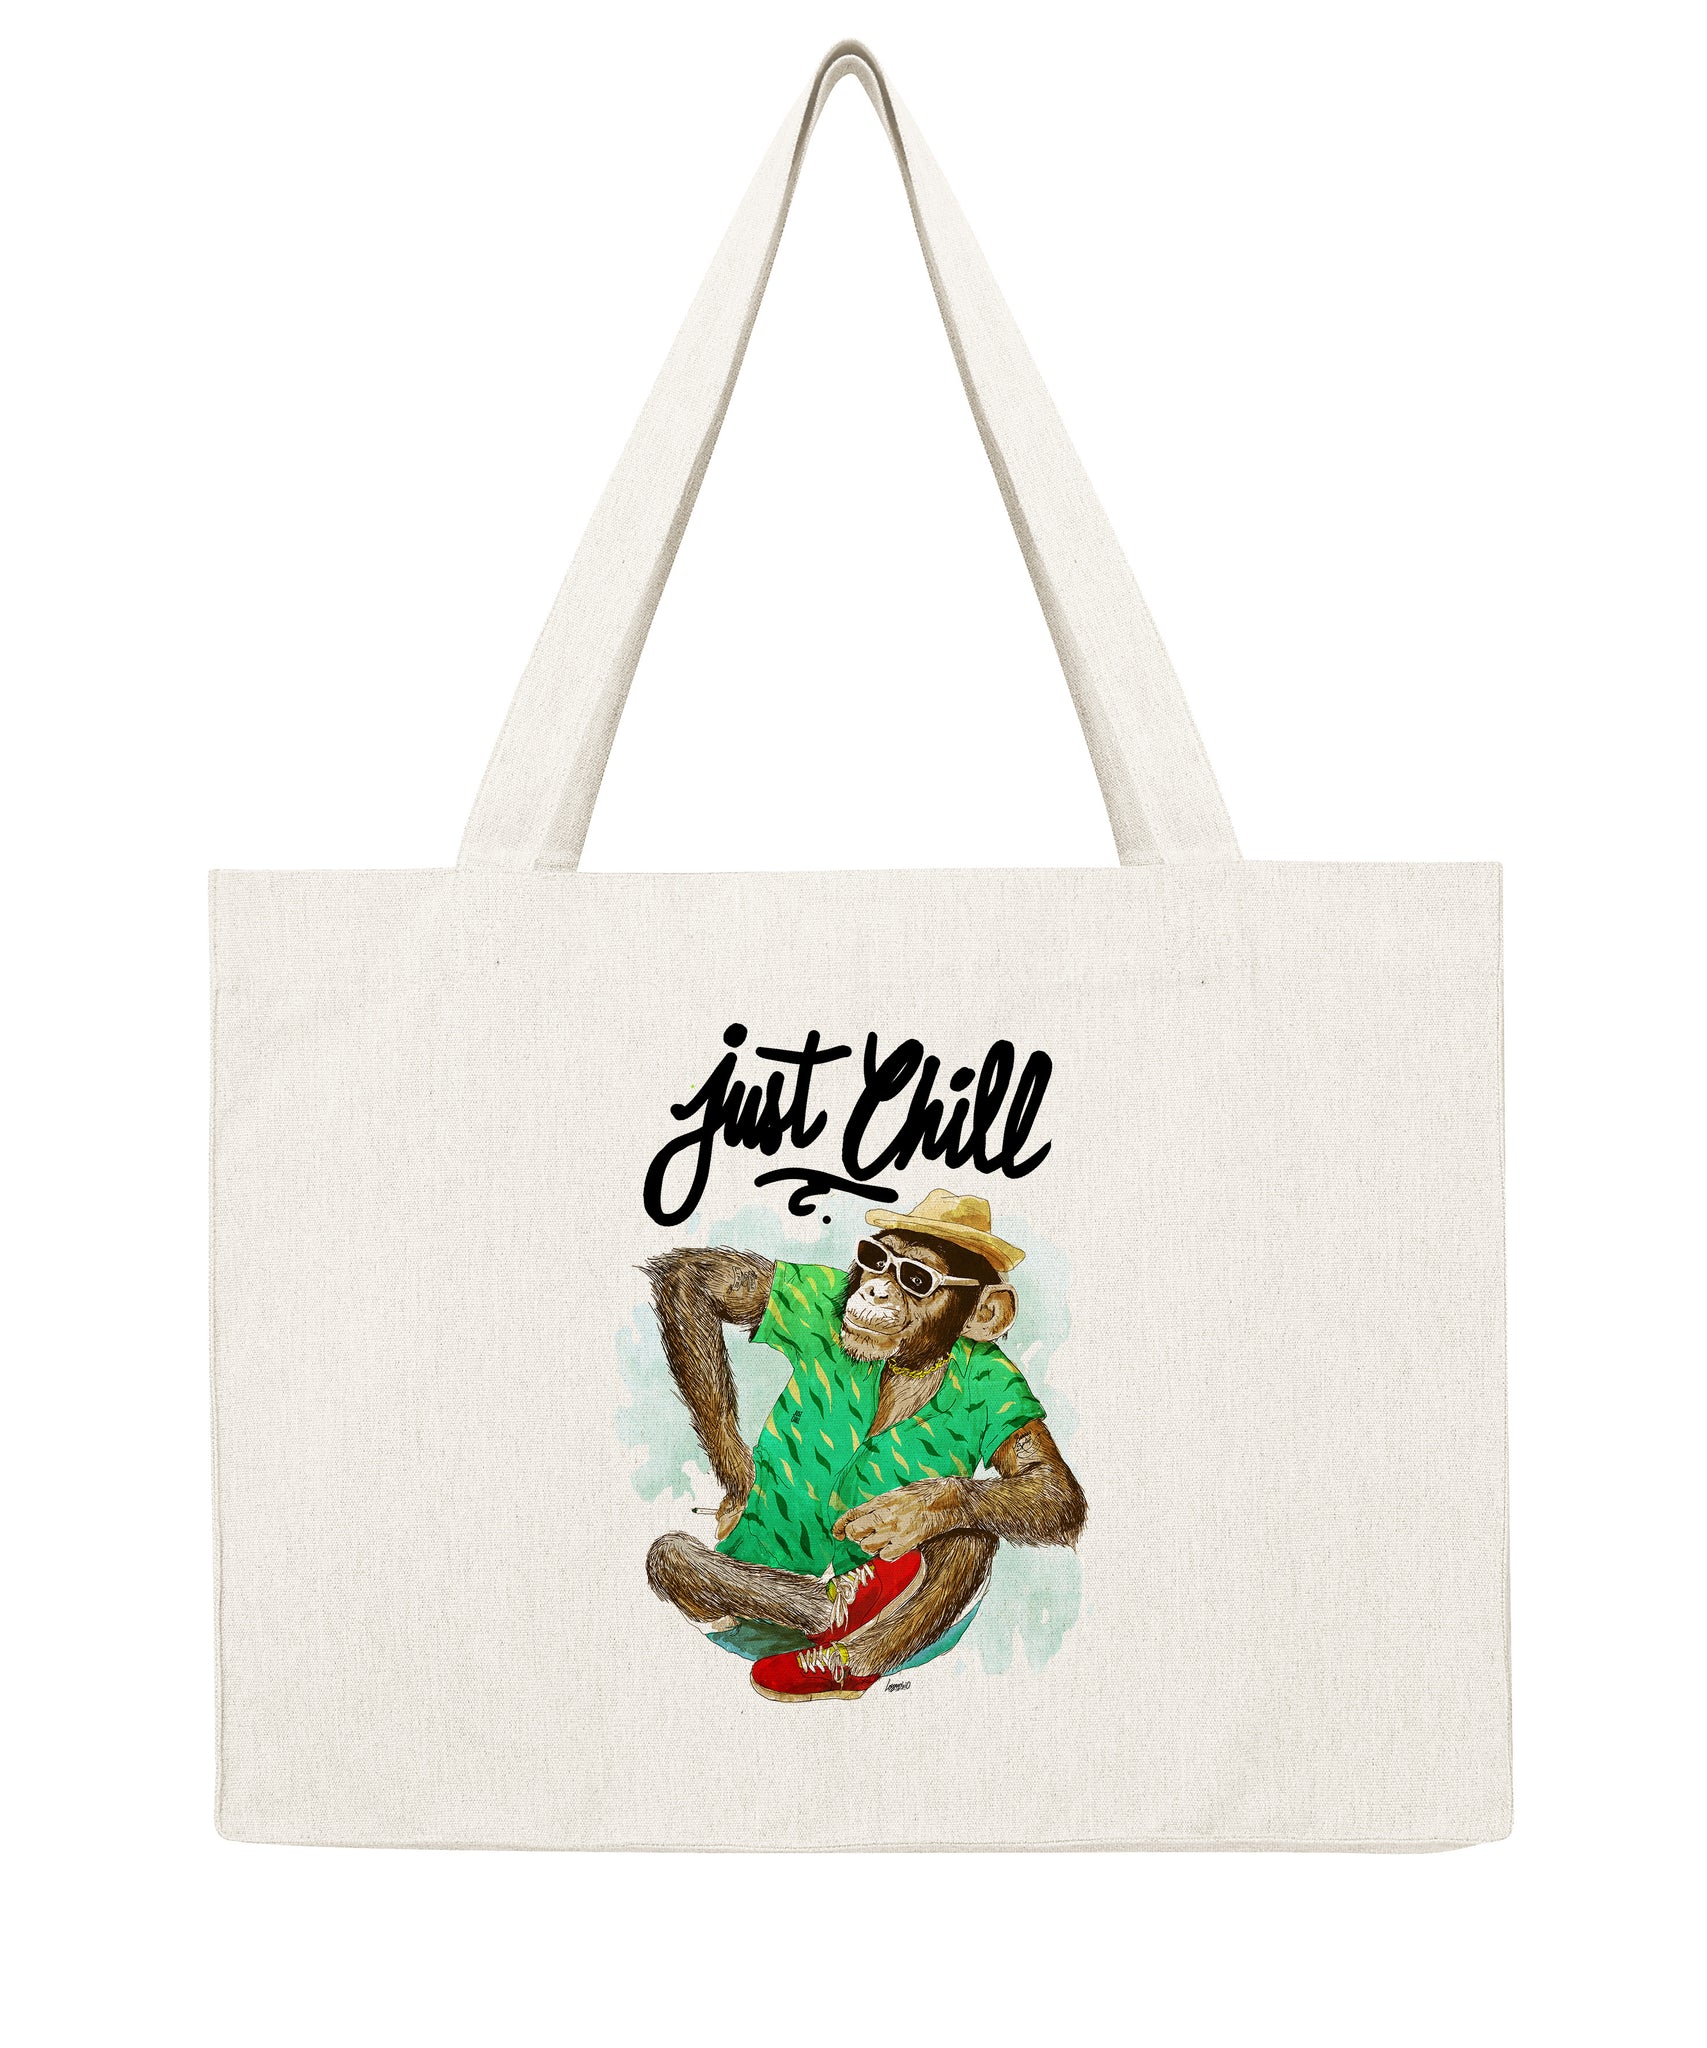 Singe just chill - Shopping bag-Sacs-Atelier Amelot